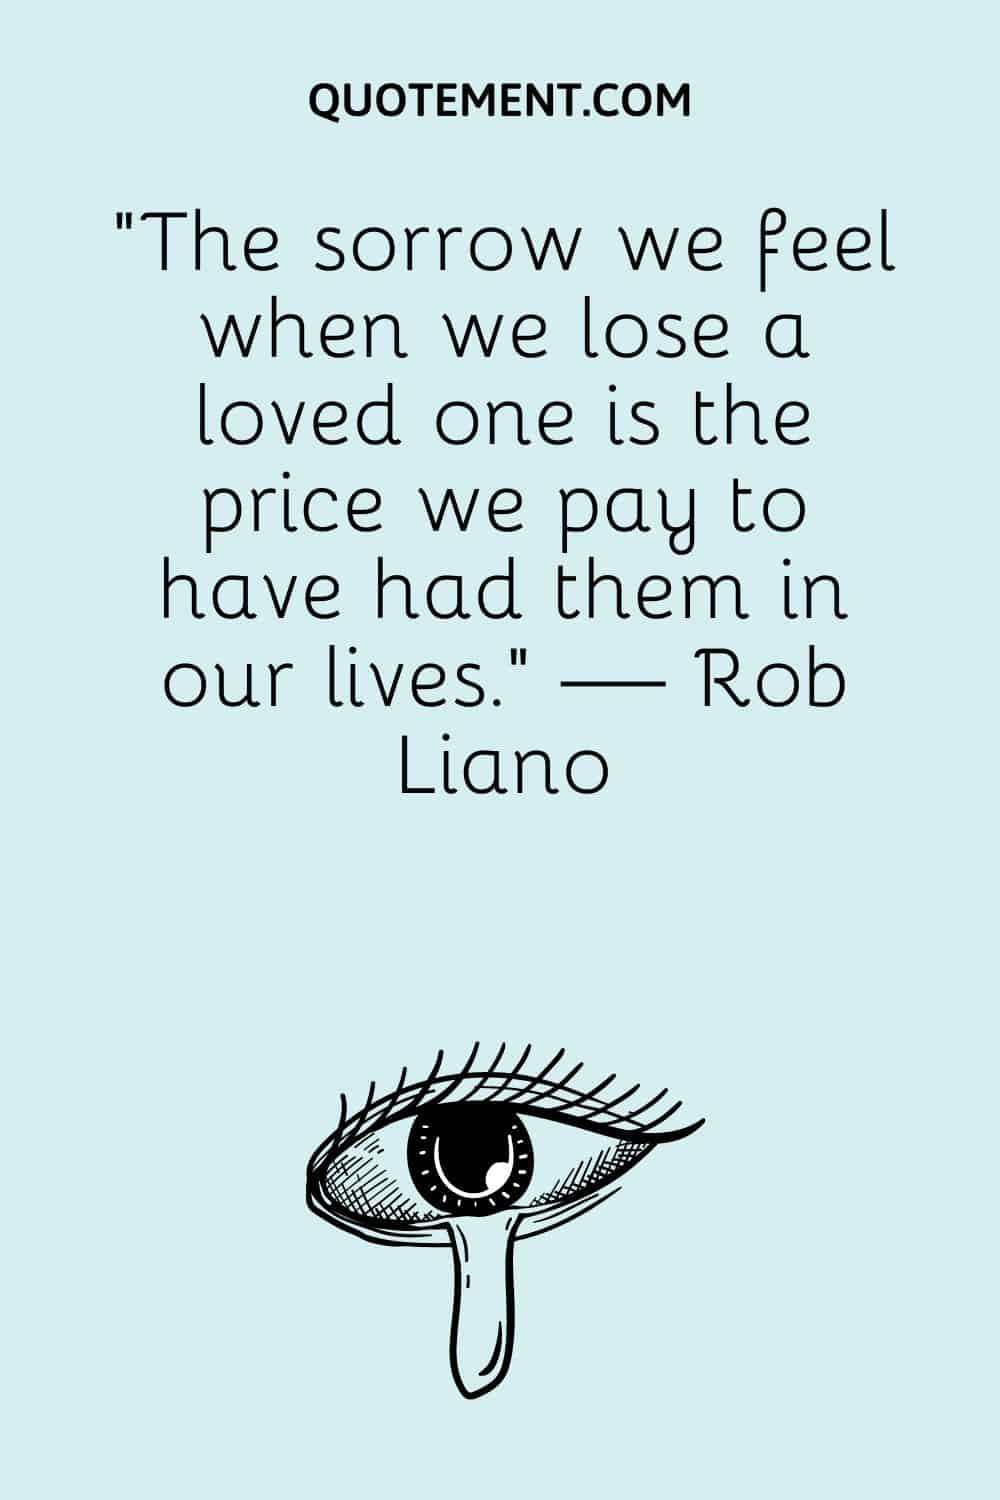 “The sorrow we feel when we lose a loved one is the price we pay to have had them in our lives.” — Rob Liano